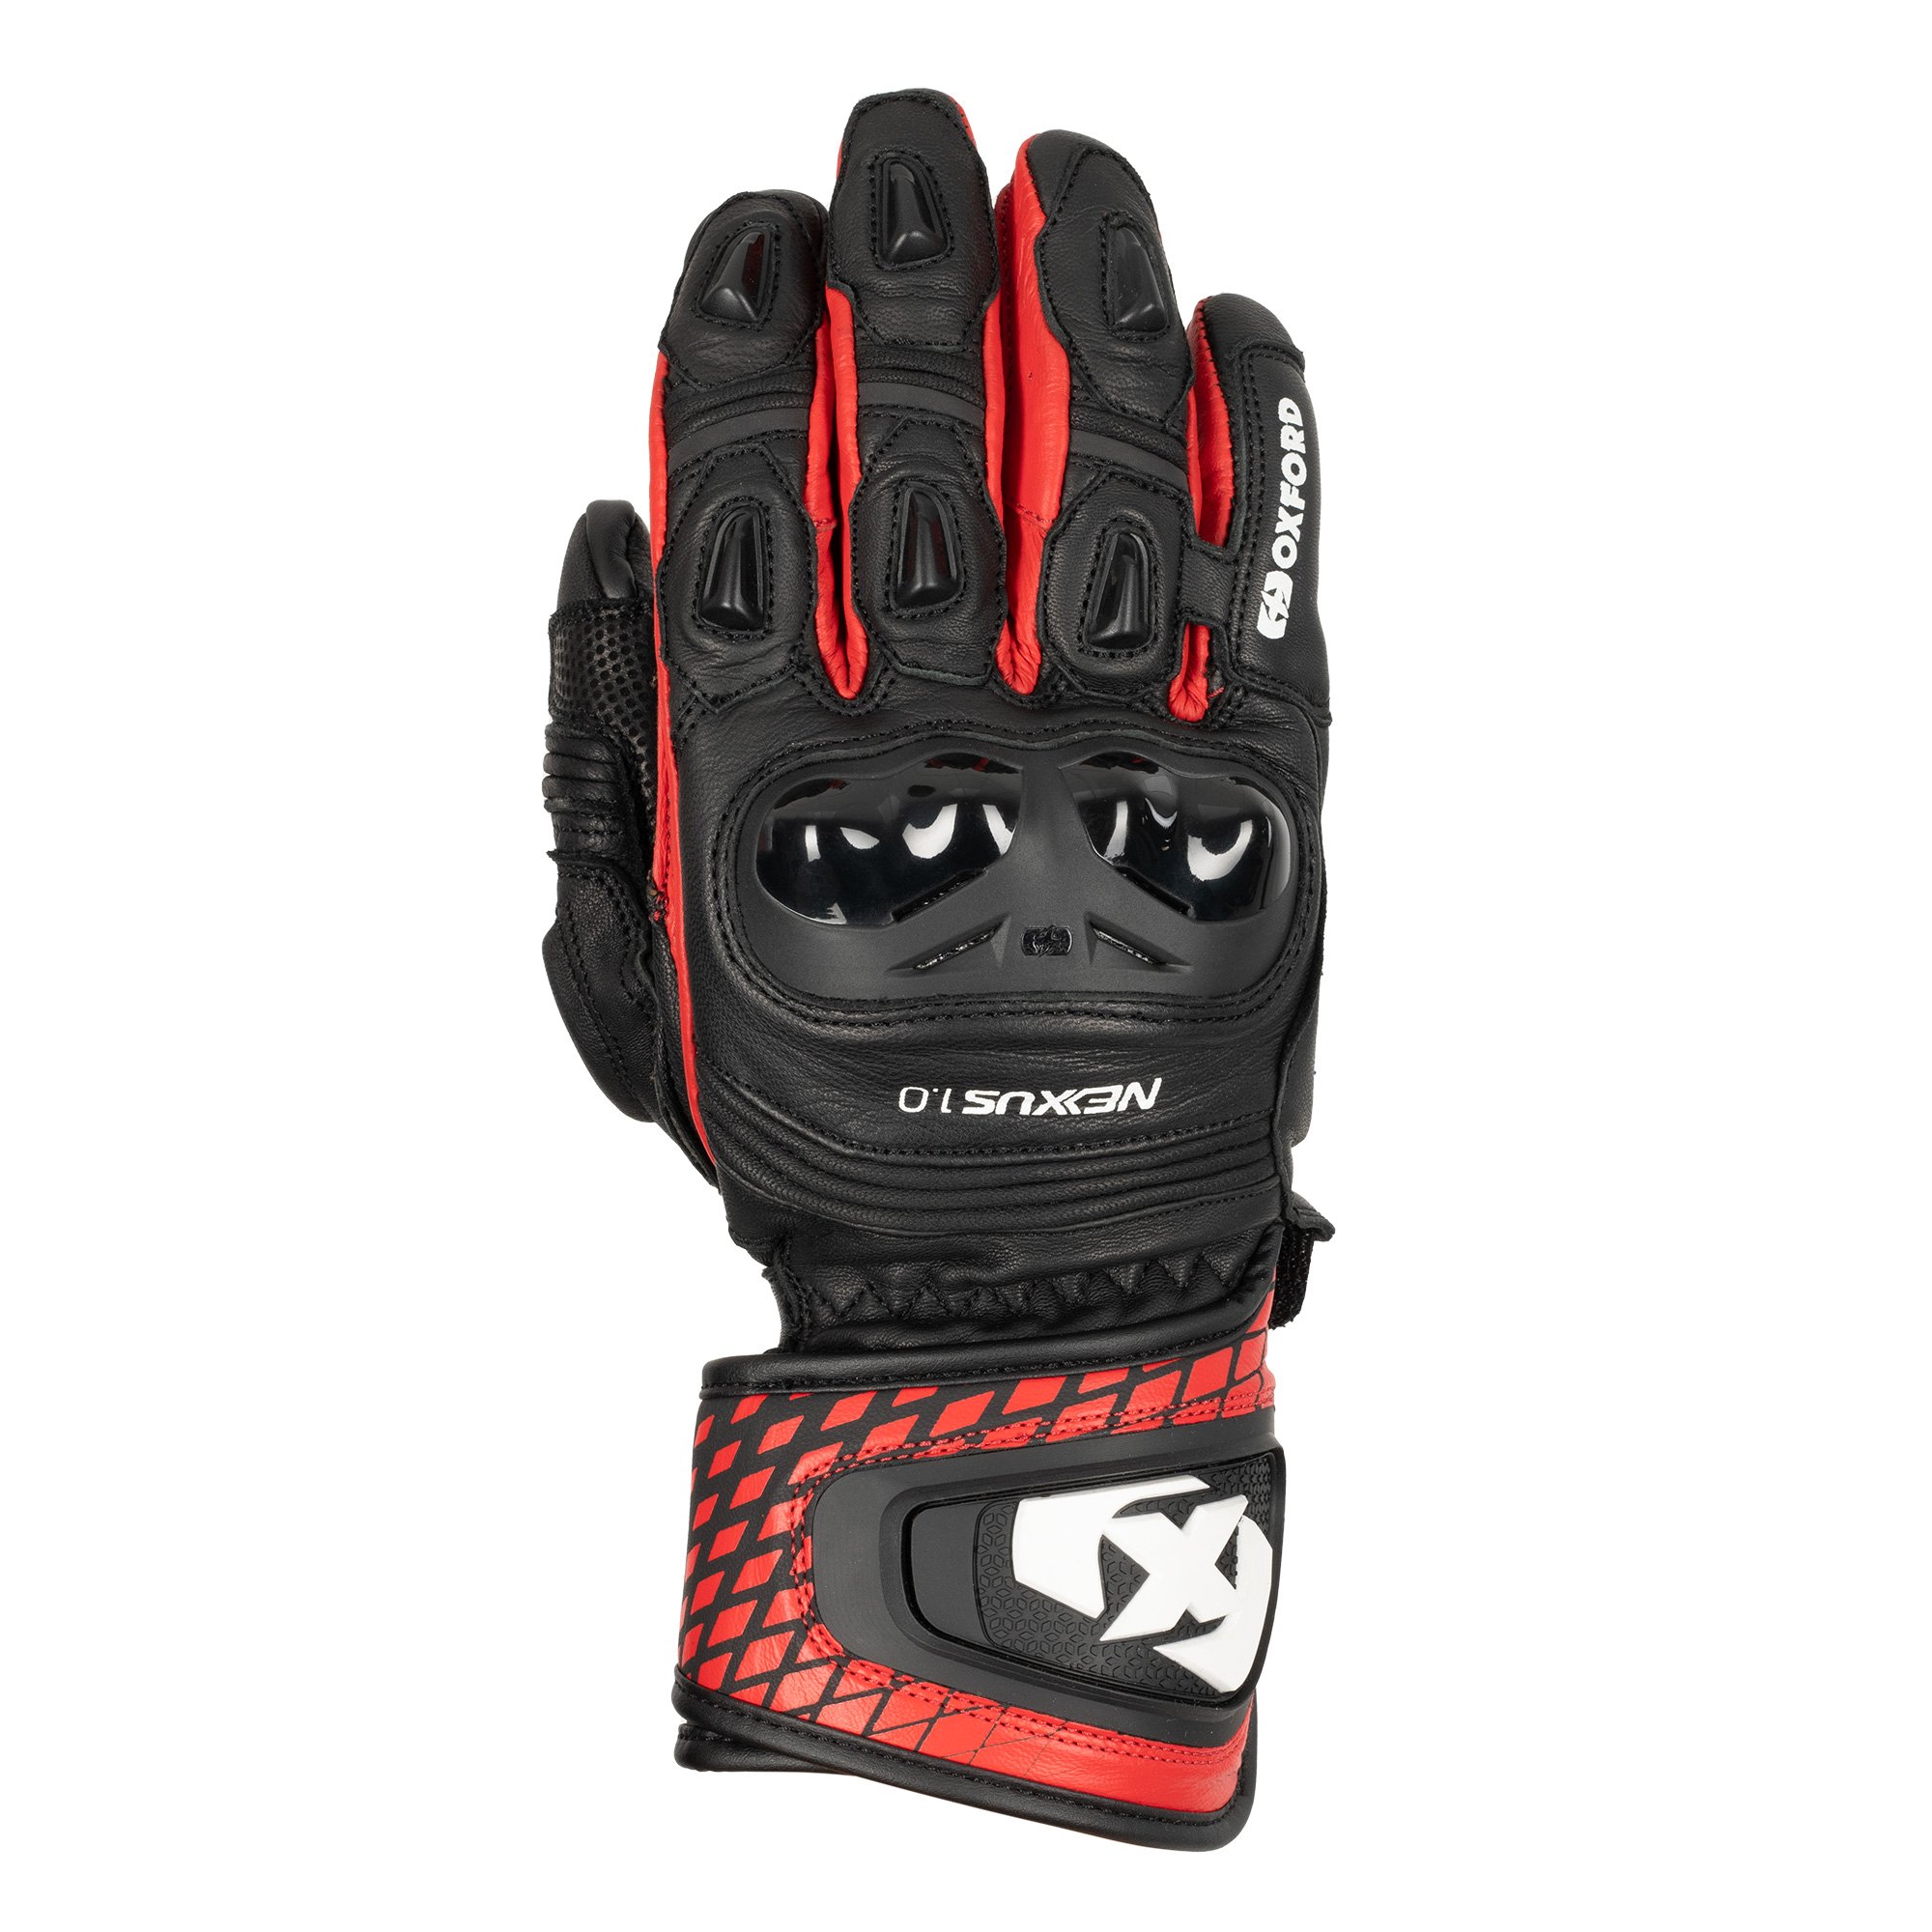 Oxford Nexus MS Glove Black/White/Red : Oxford Products